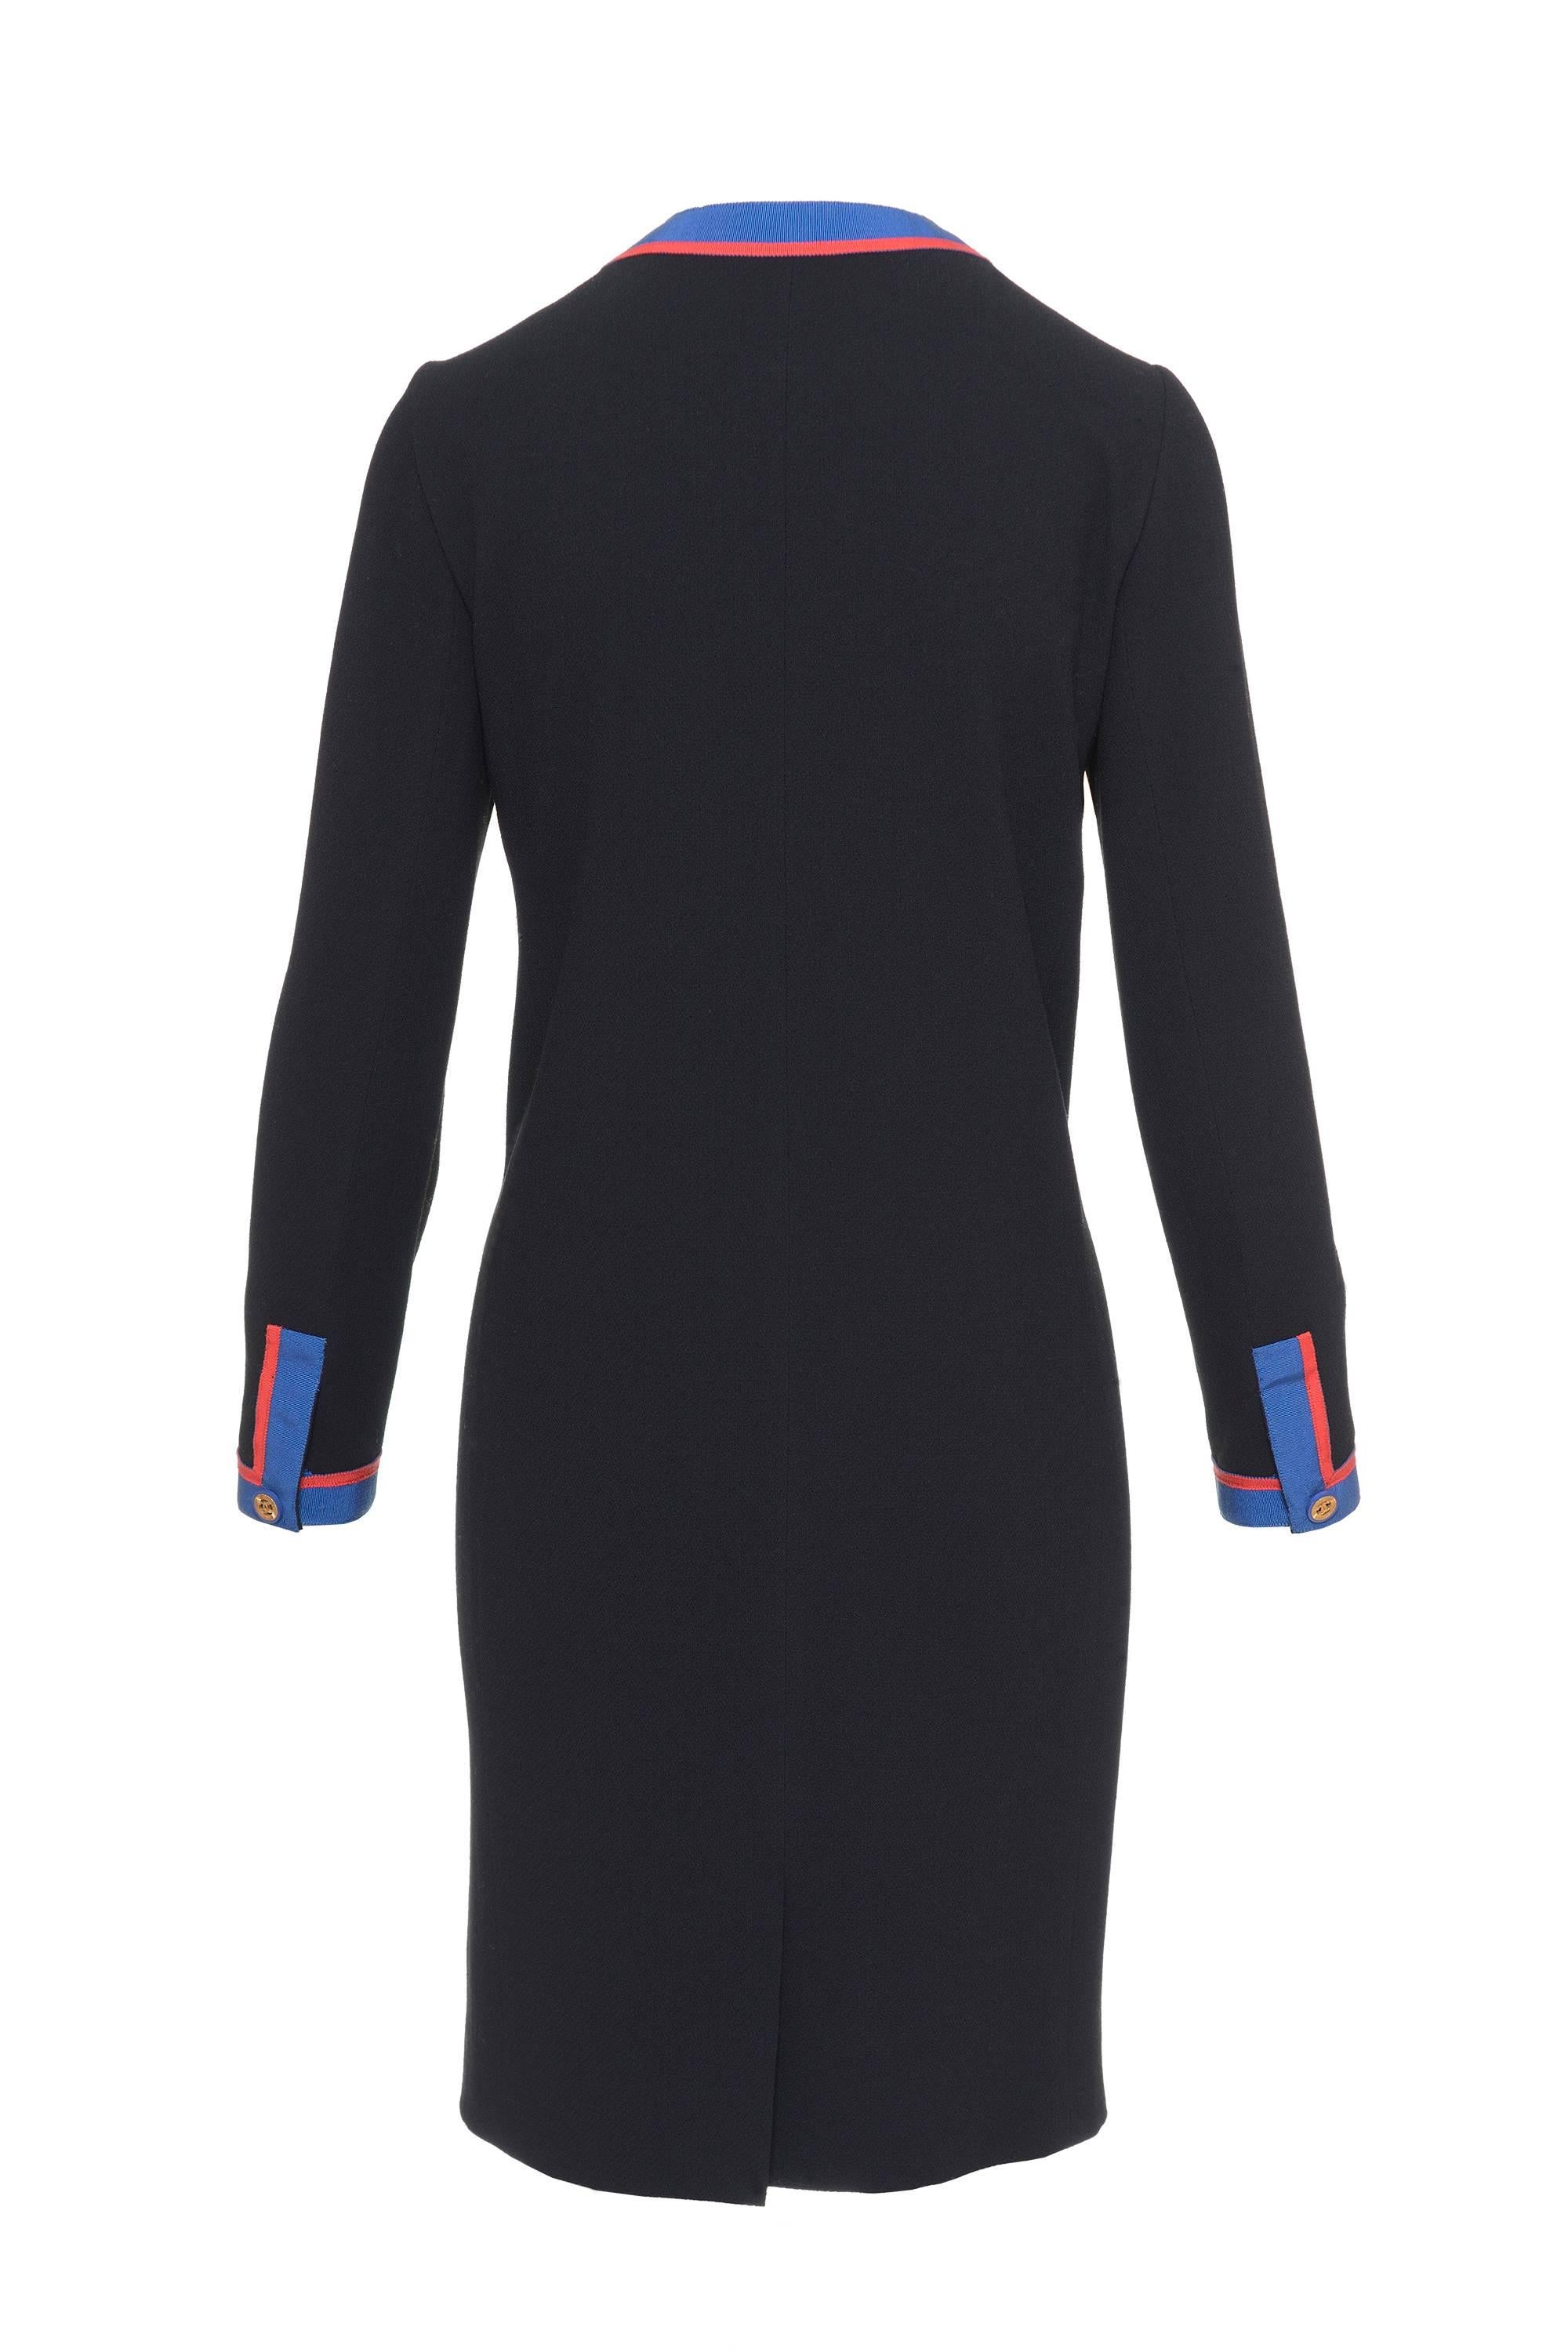 CHANEL BOUTIQUE Black Suit Dress In Excellent Condition In Milan, Italy